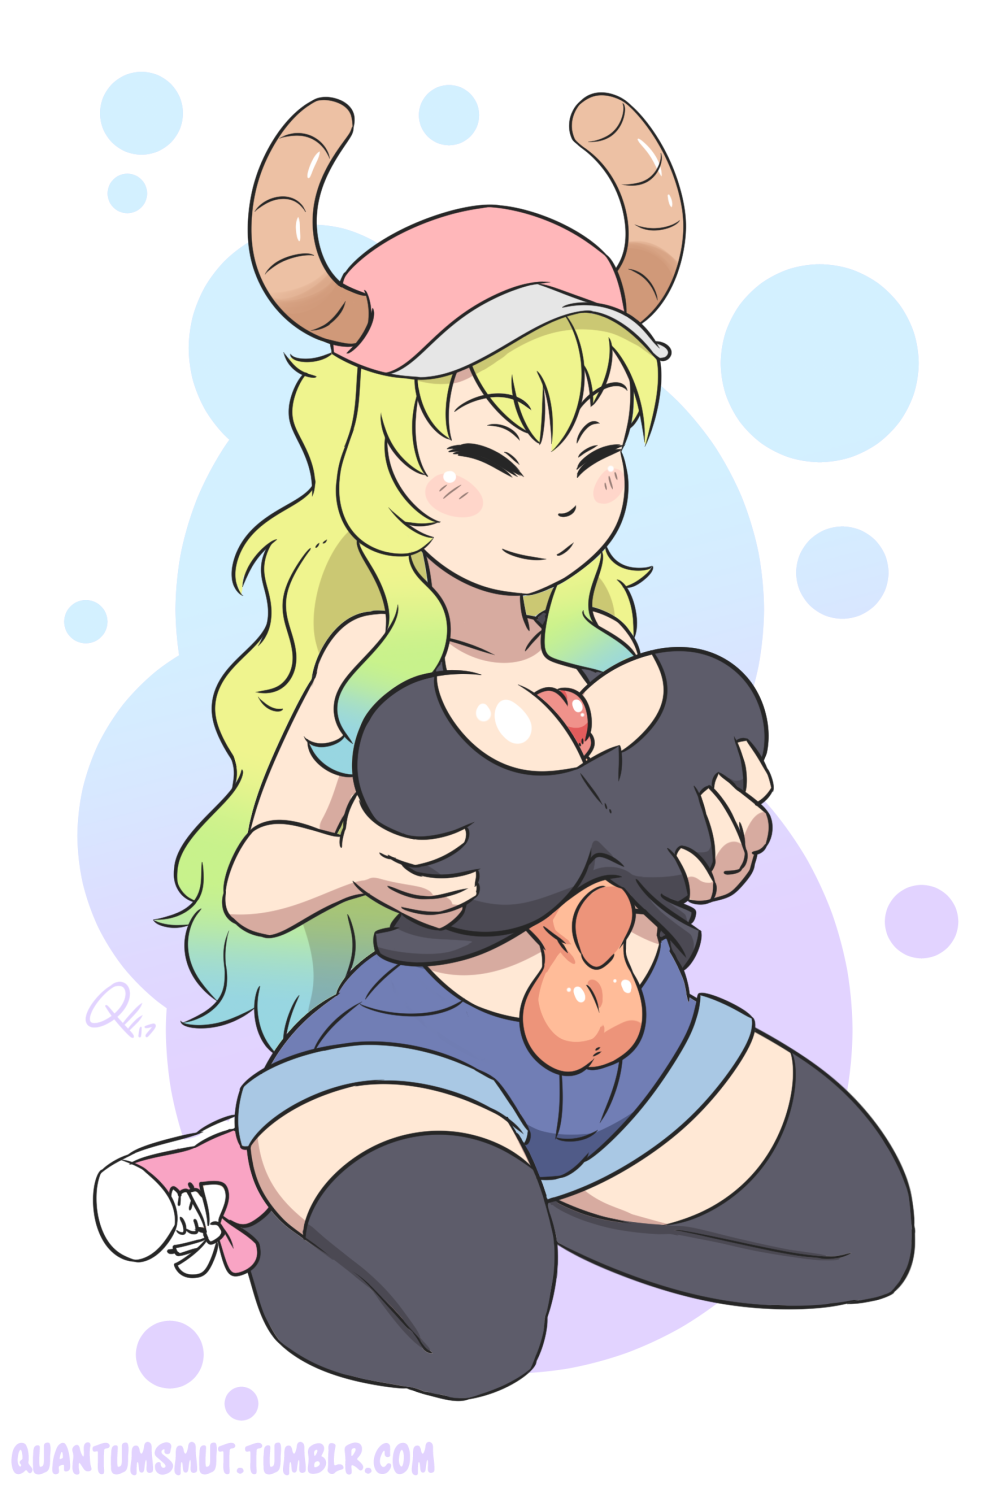 inkstash: quantumsmut:  Revisited the Lucoa drawing I did a while ago to add some